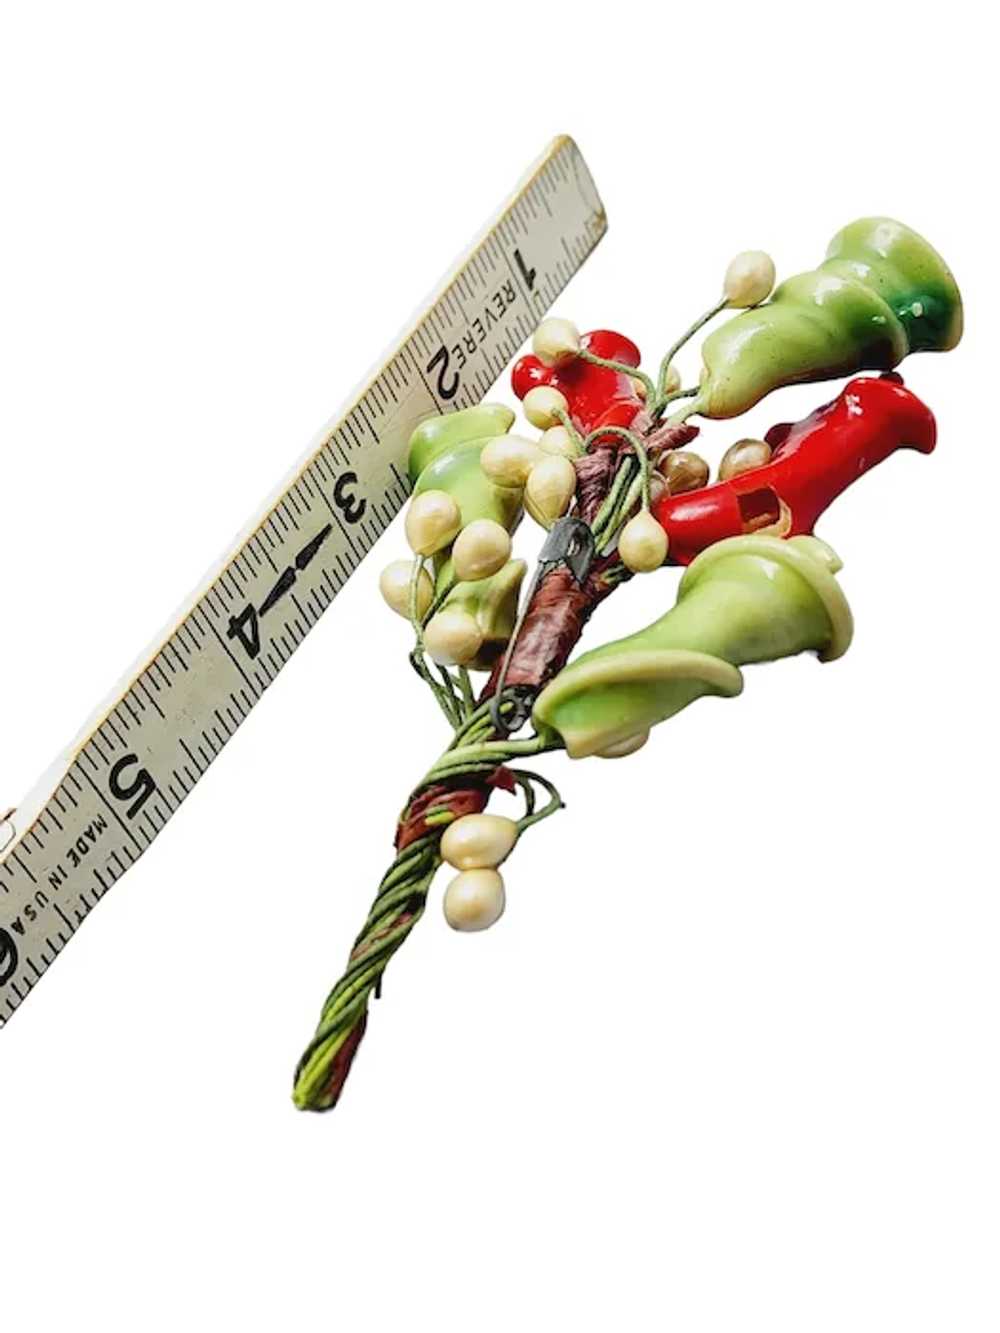 Rare Antique Hand Wired Floral Stem Brooch (A745) - image 6